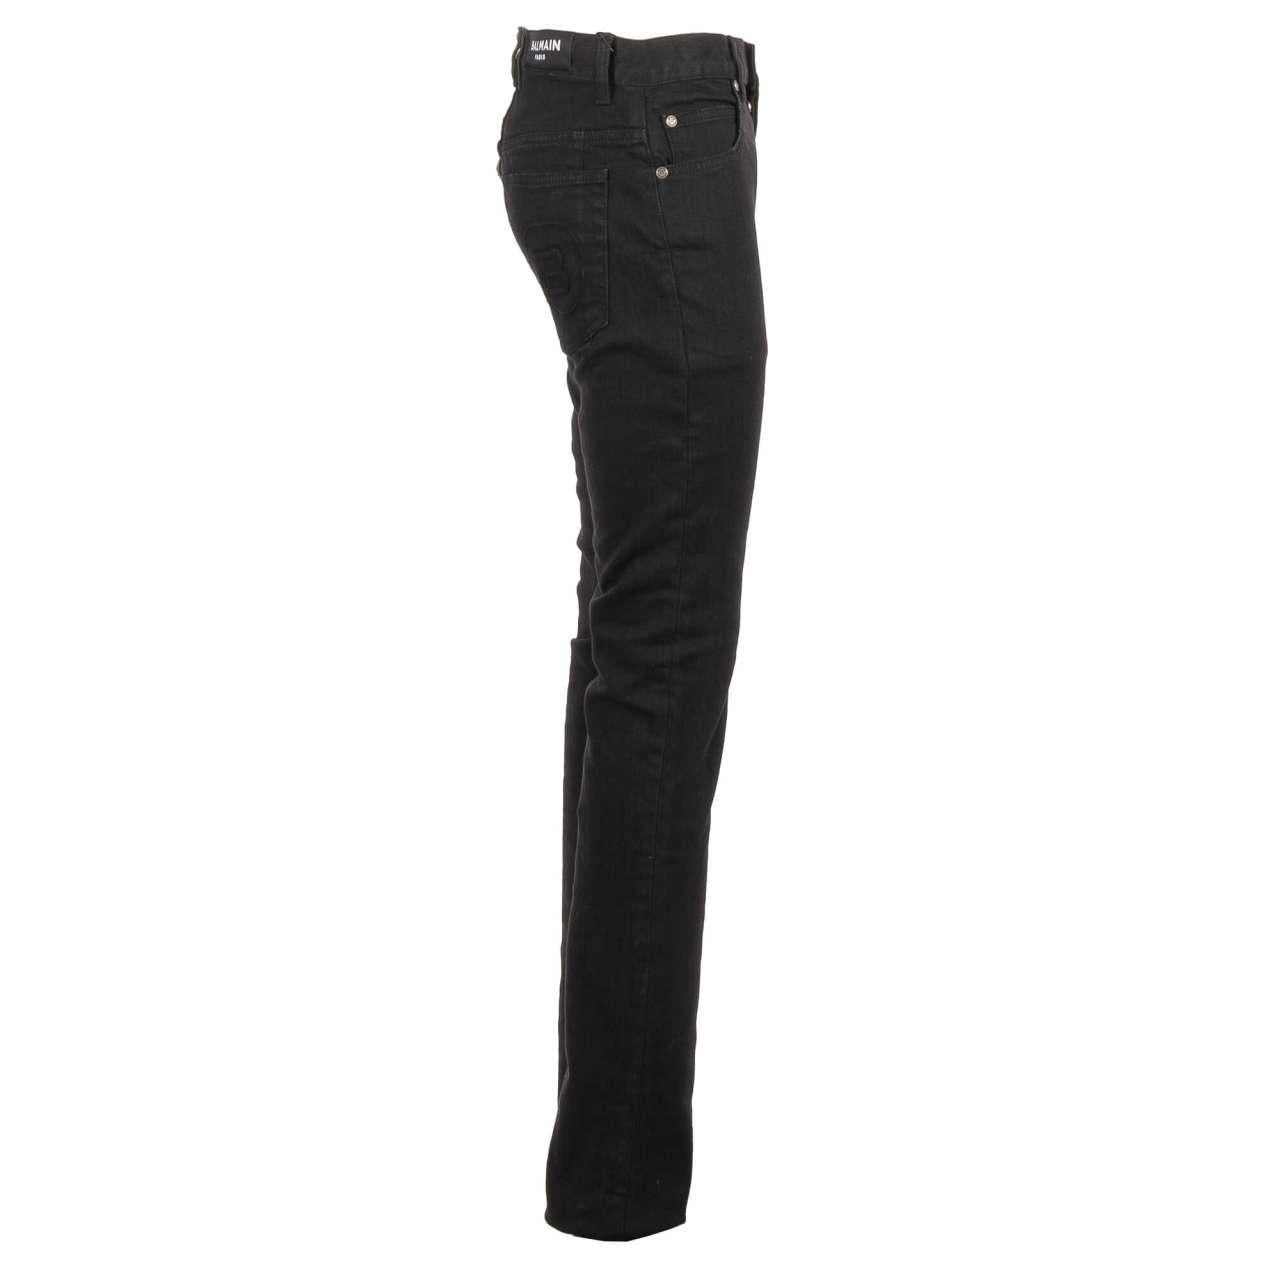 - 6-pockets Jeans SLIM with a large logo texture at the back by BALMAIN - New with tag - MADE IN JAPAN - Former RRP: EUR 790 - Slim Cut - Model:Â UH15230Z0170PA - Material: 98% Cotton, 2% Polyurethan - Color: Black - 6 Pockets Jeans - Large logo